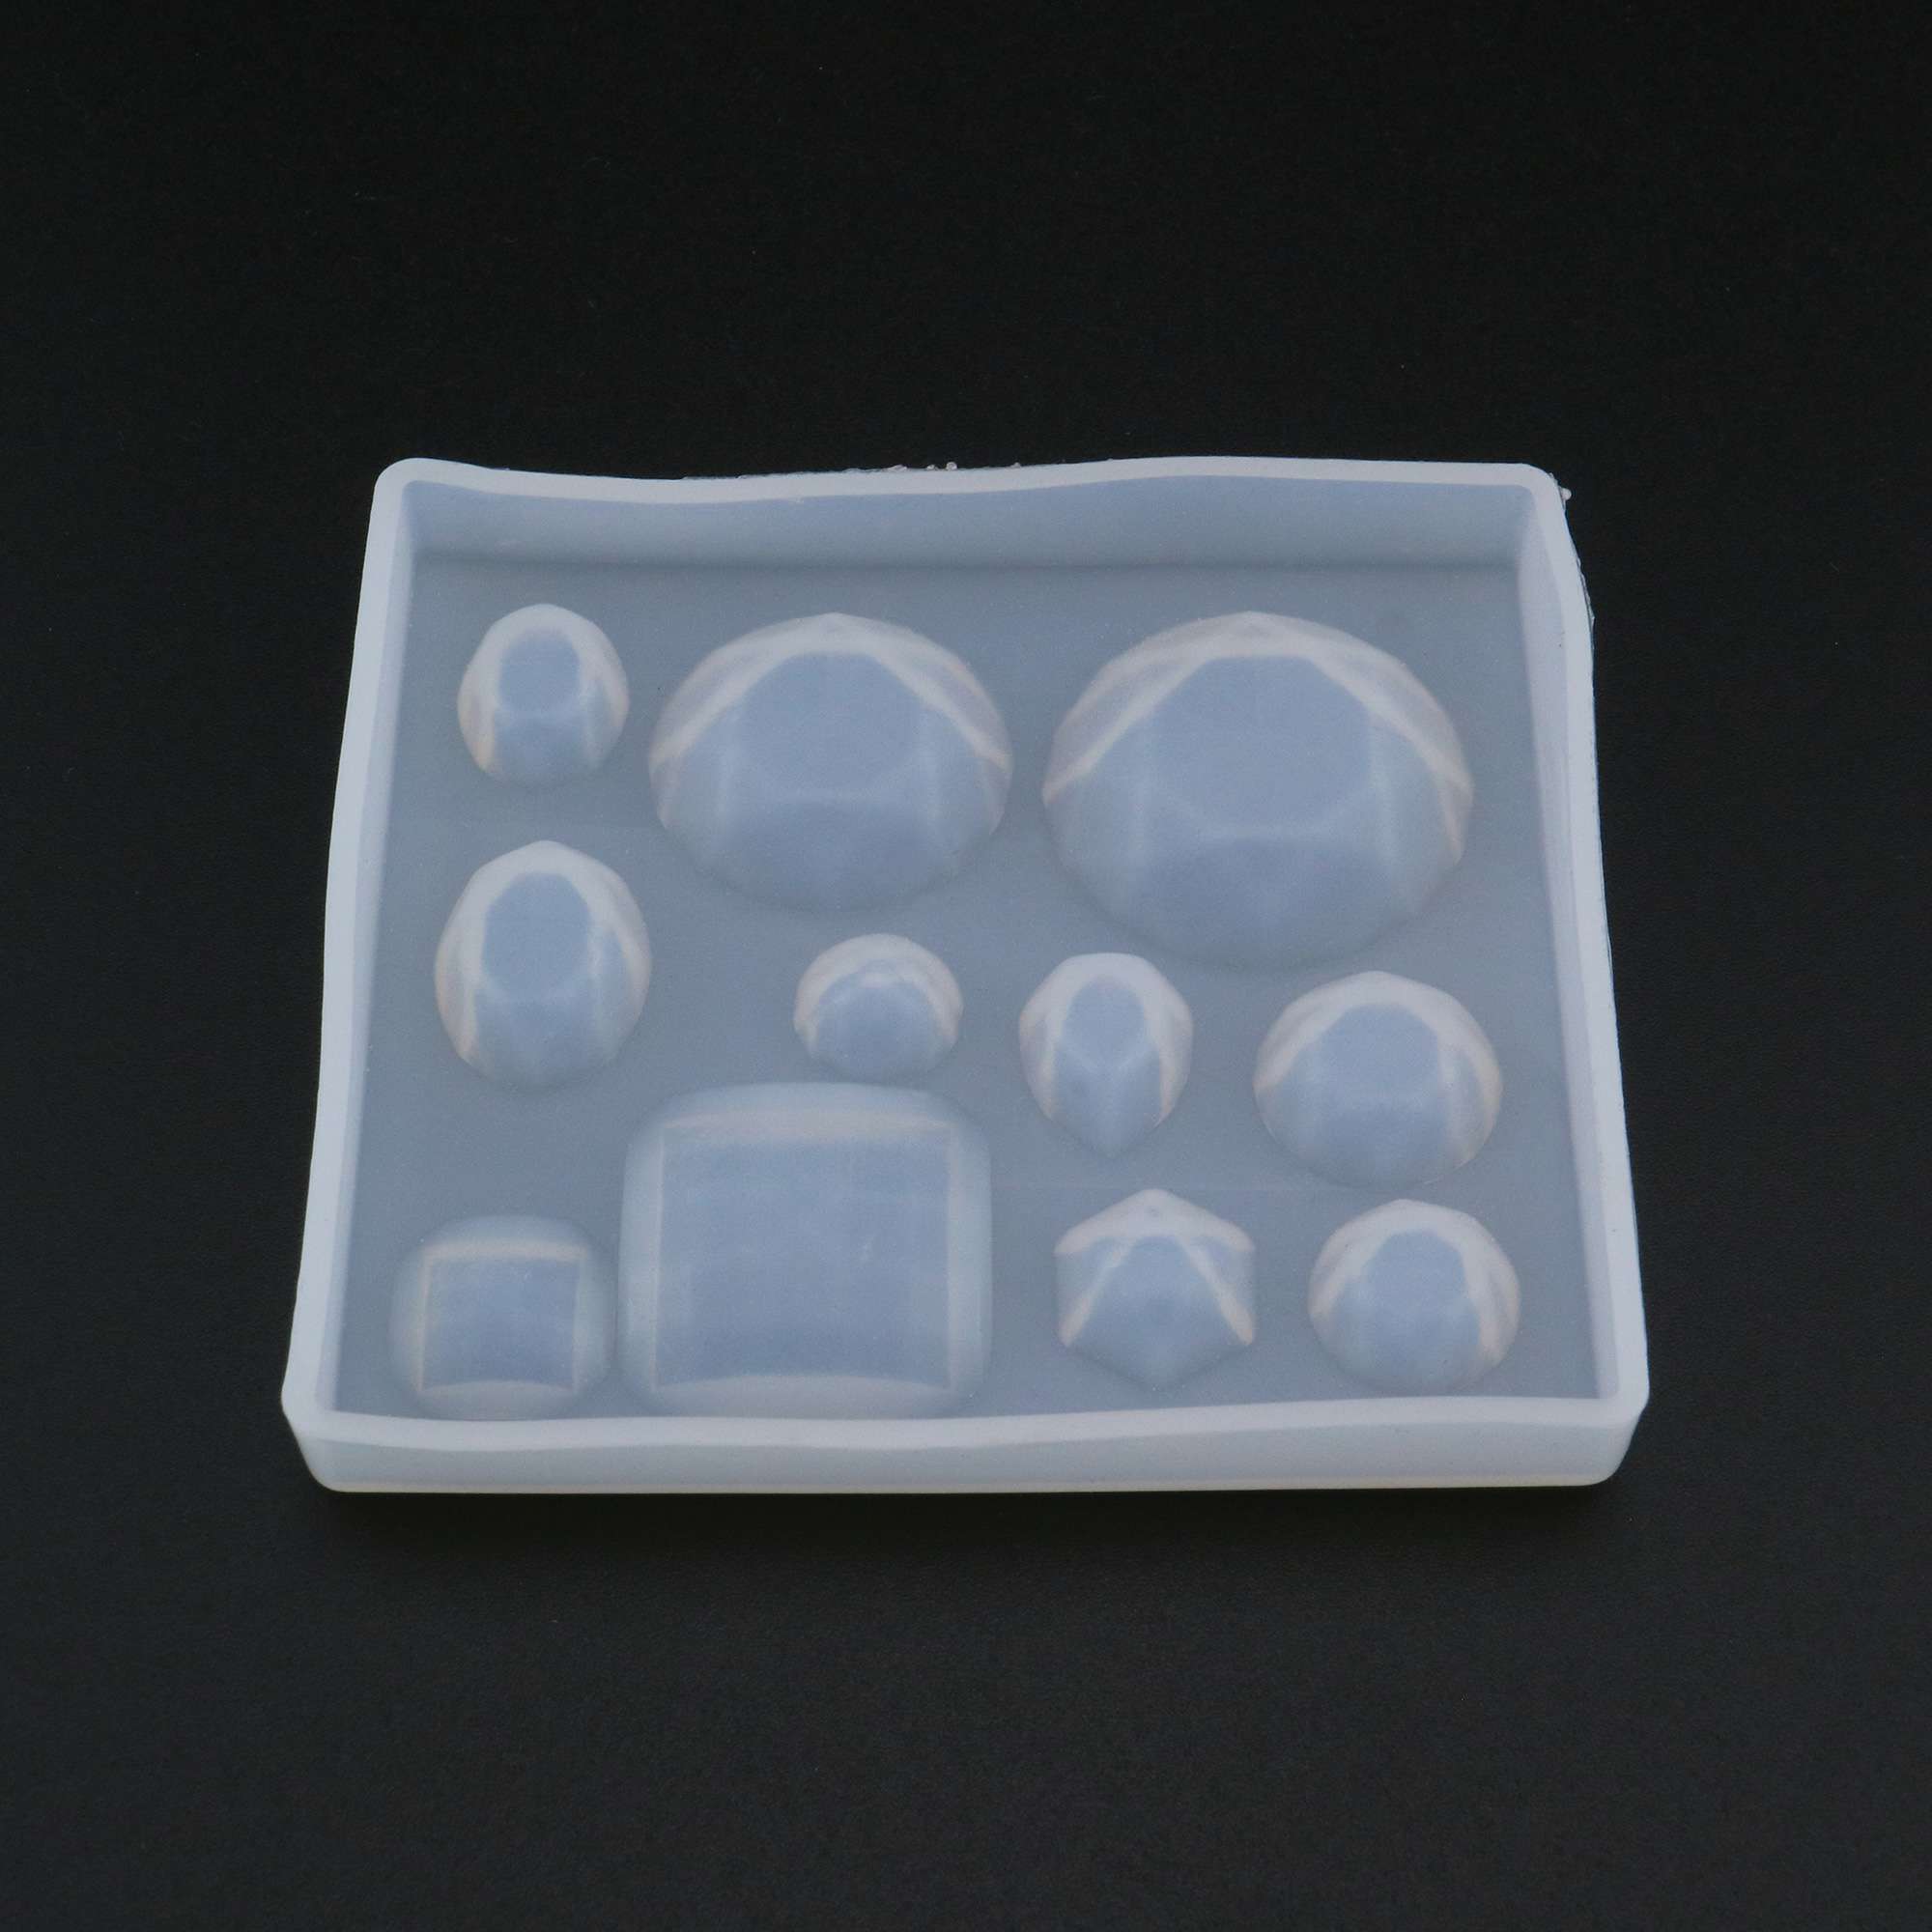 Assortment Shape Breast Milk Cabochon Silicone Mold Epoxy Resin Keepsake DIY Jewelry Making Supplies 1507047 - Click Image to Close